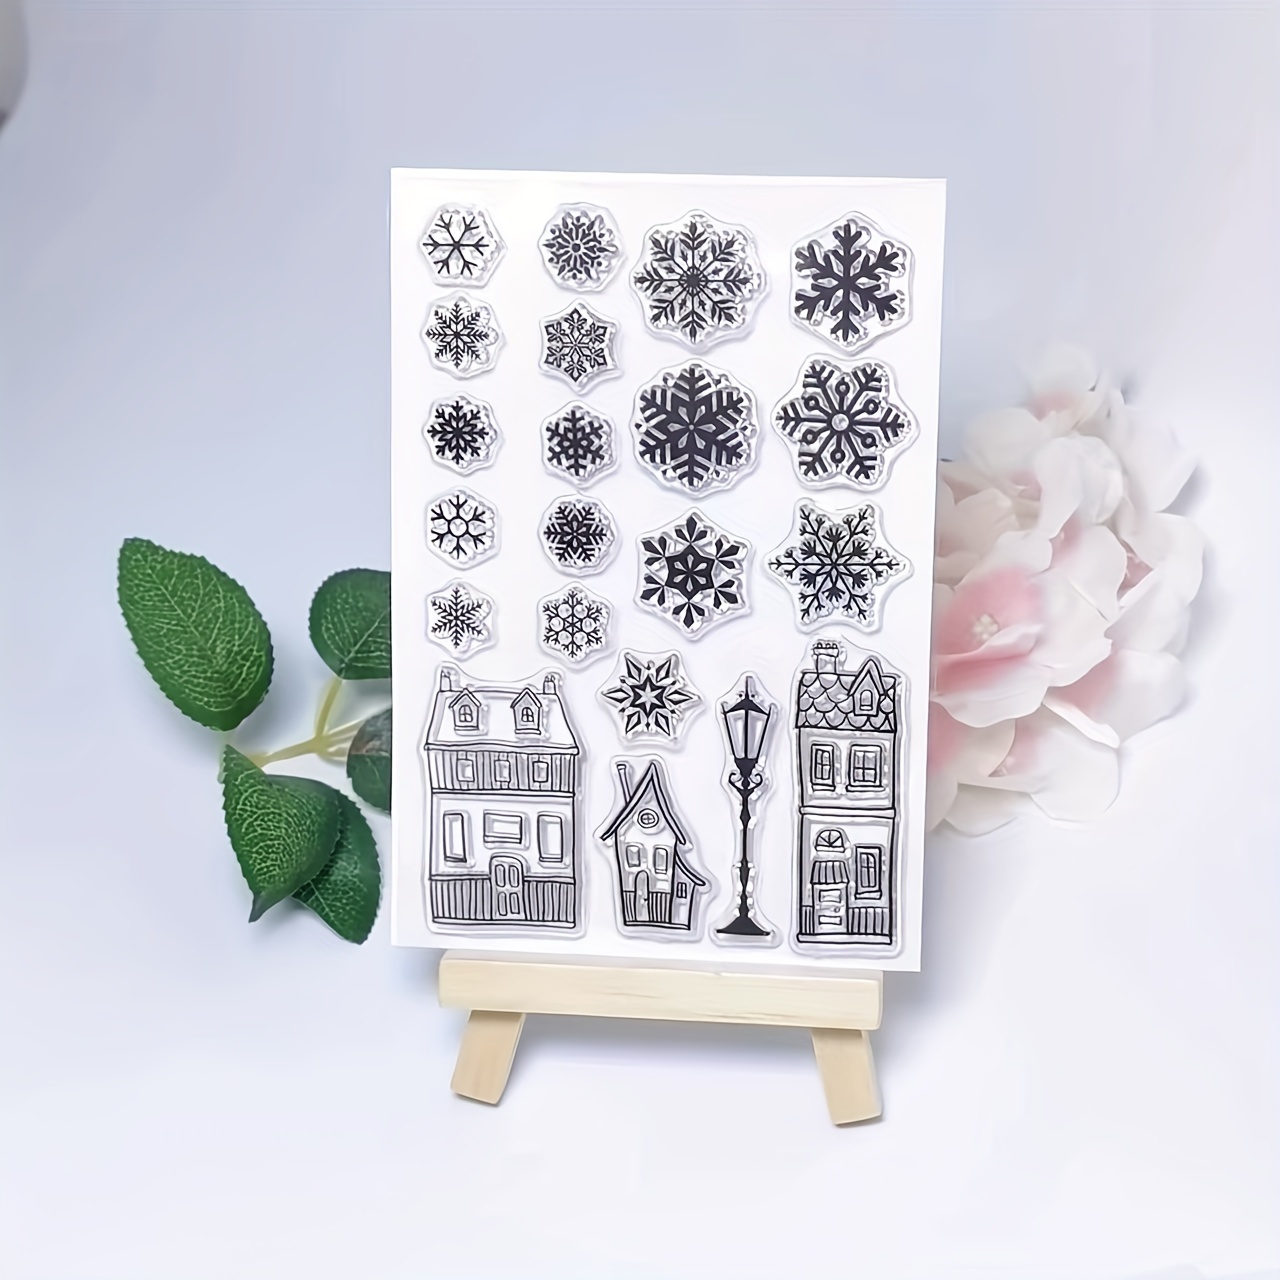 1pc Clear Stamp Block With Grid Lines, Acrylic Stamp Block, DIY Acrylic  Stamping Tool, Positioning Stamp Tool Kit, Stamps Scrapbook Craft,  Cardmaking